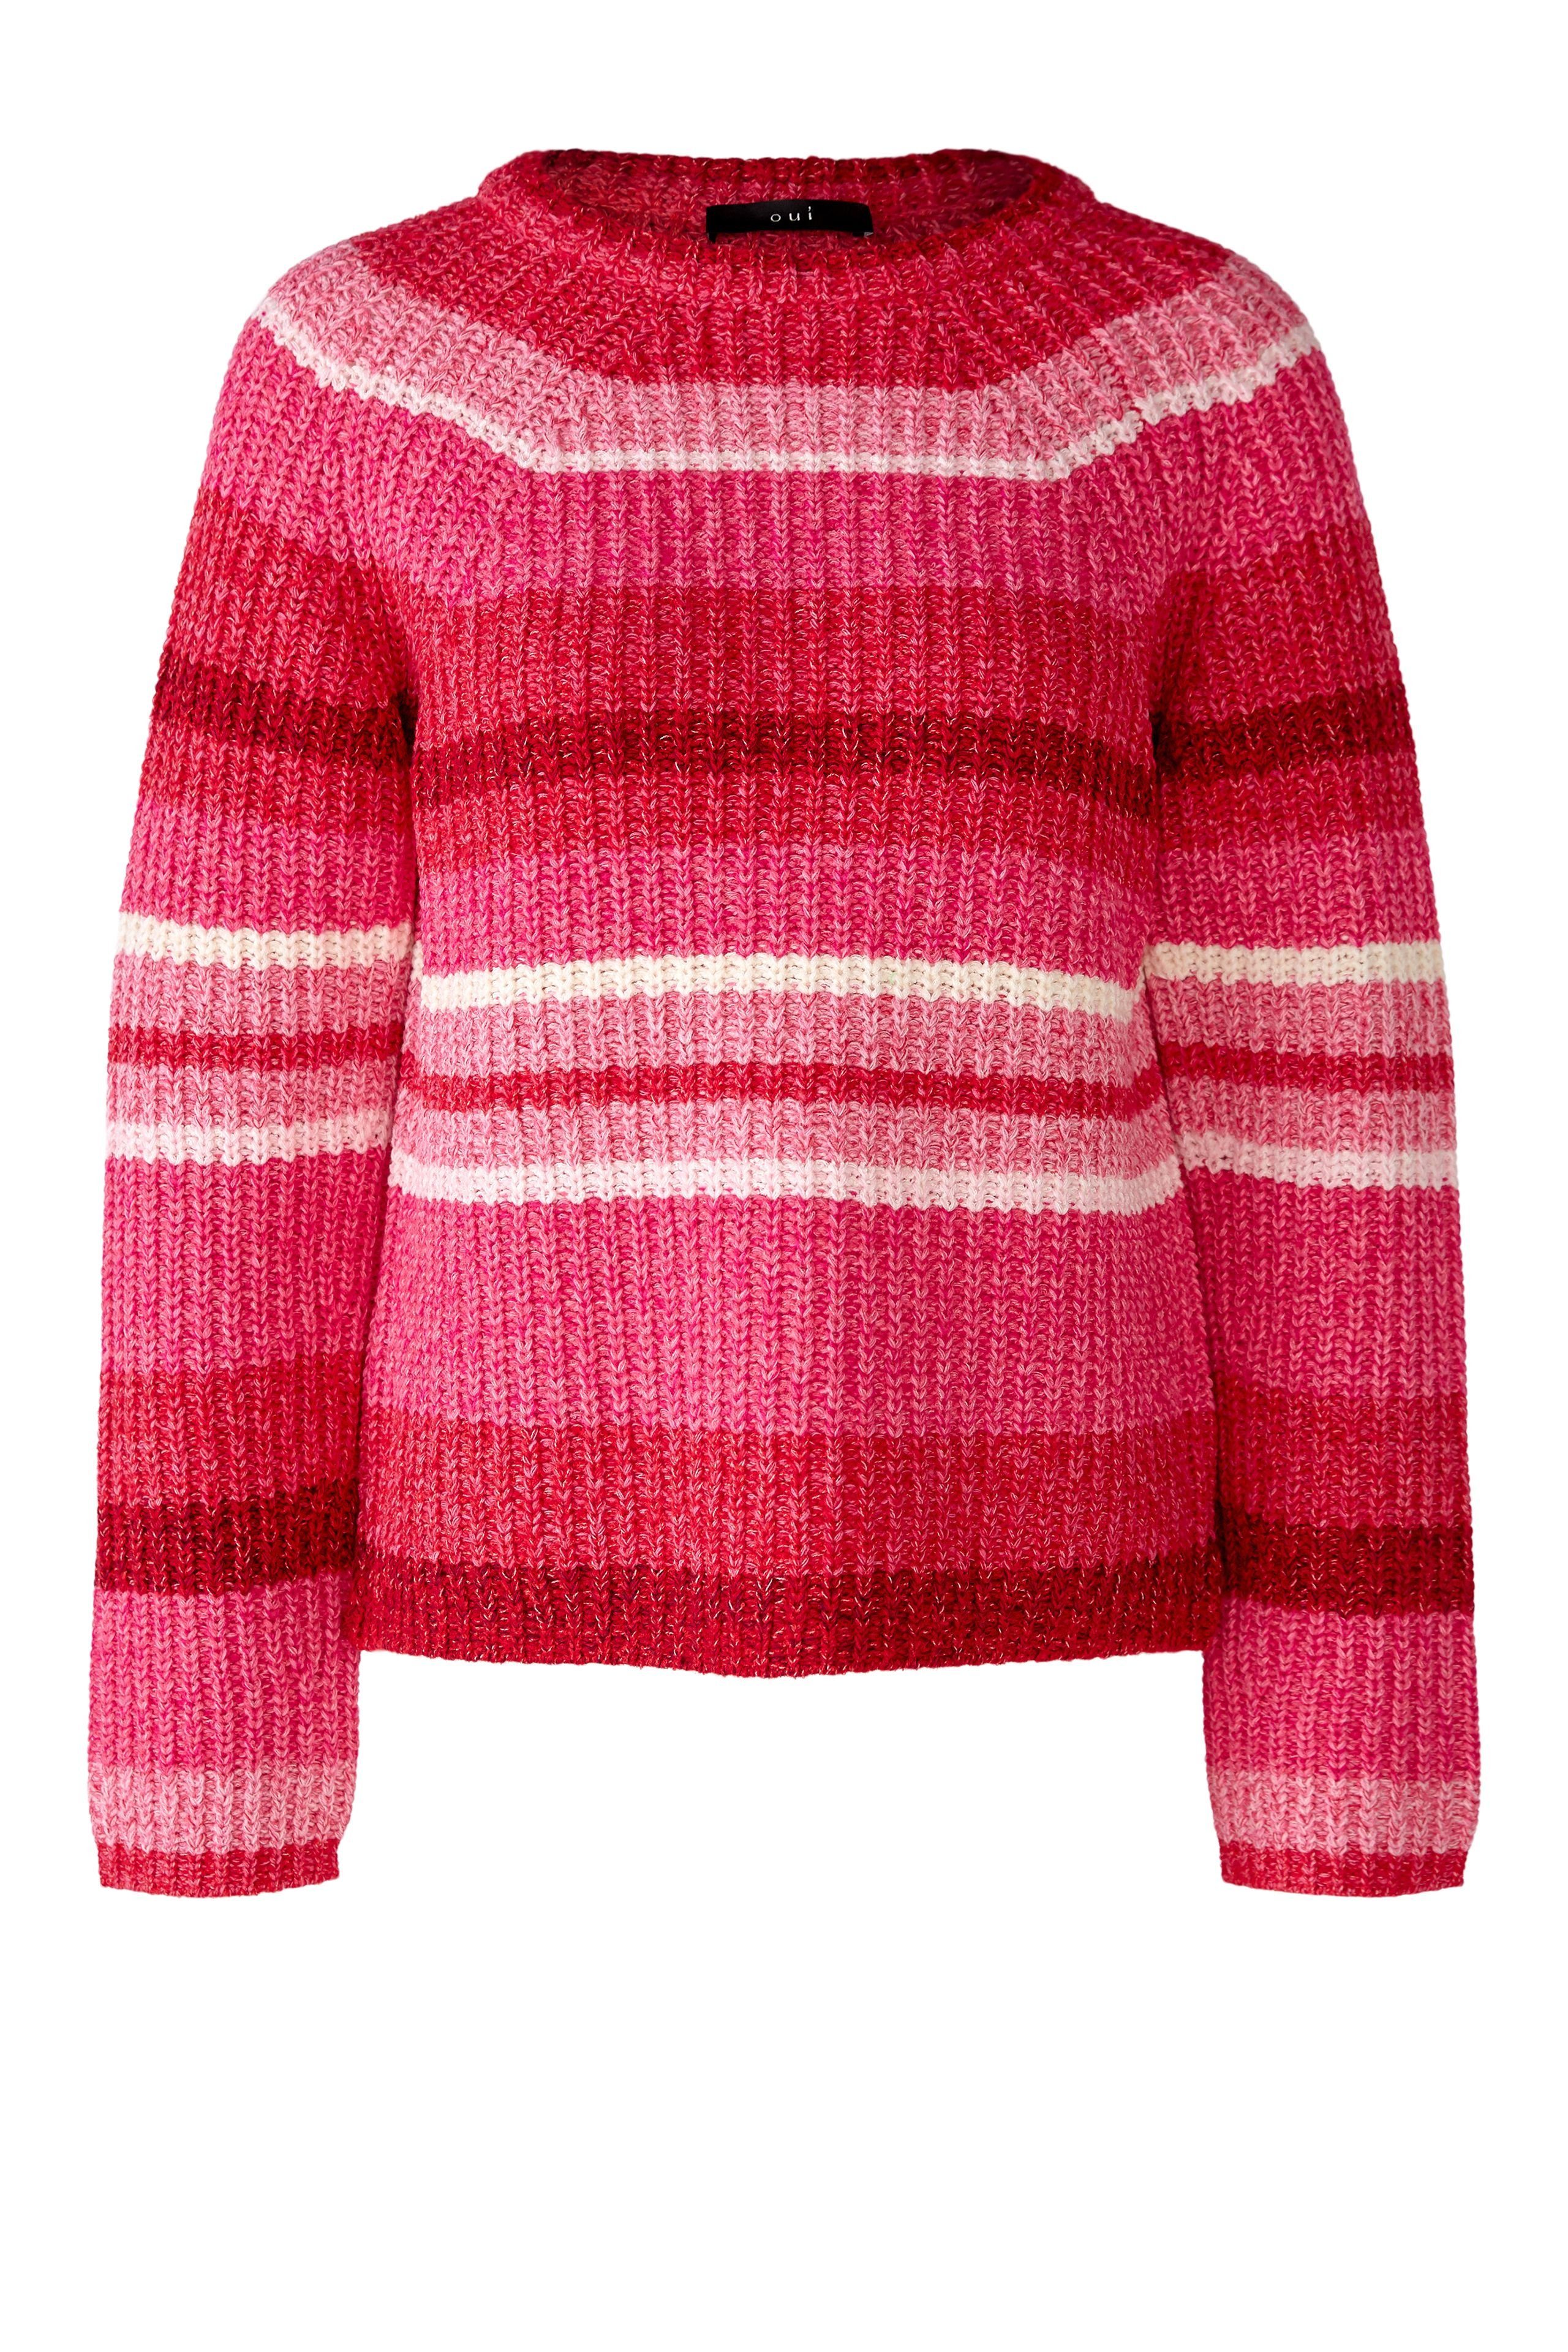 Oui Strickpullover Oui Damen Pullover Iconic Garnmix - pink red 44 (1-tlg)